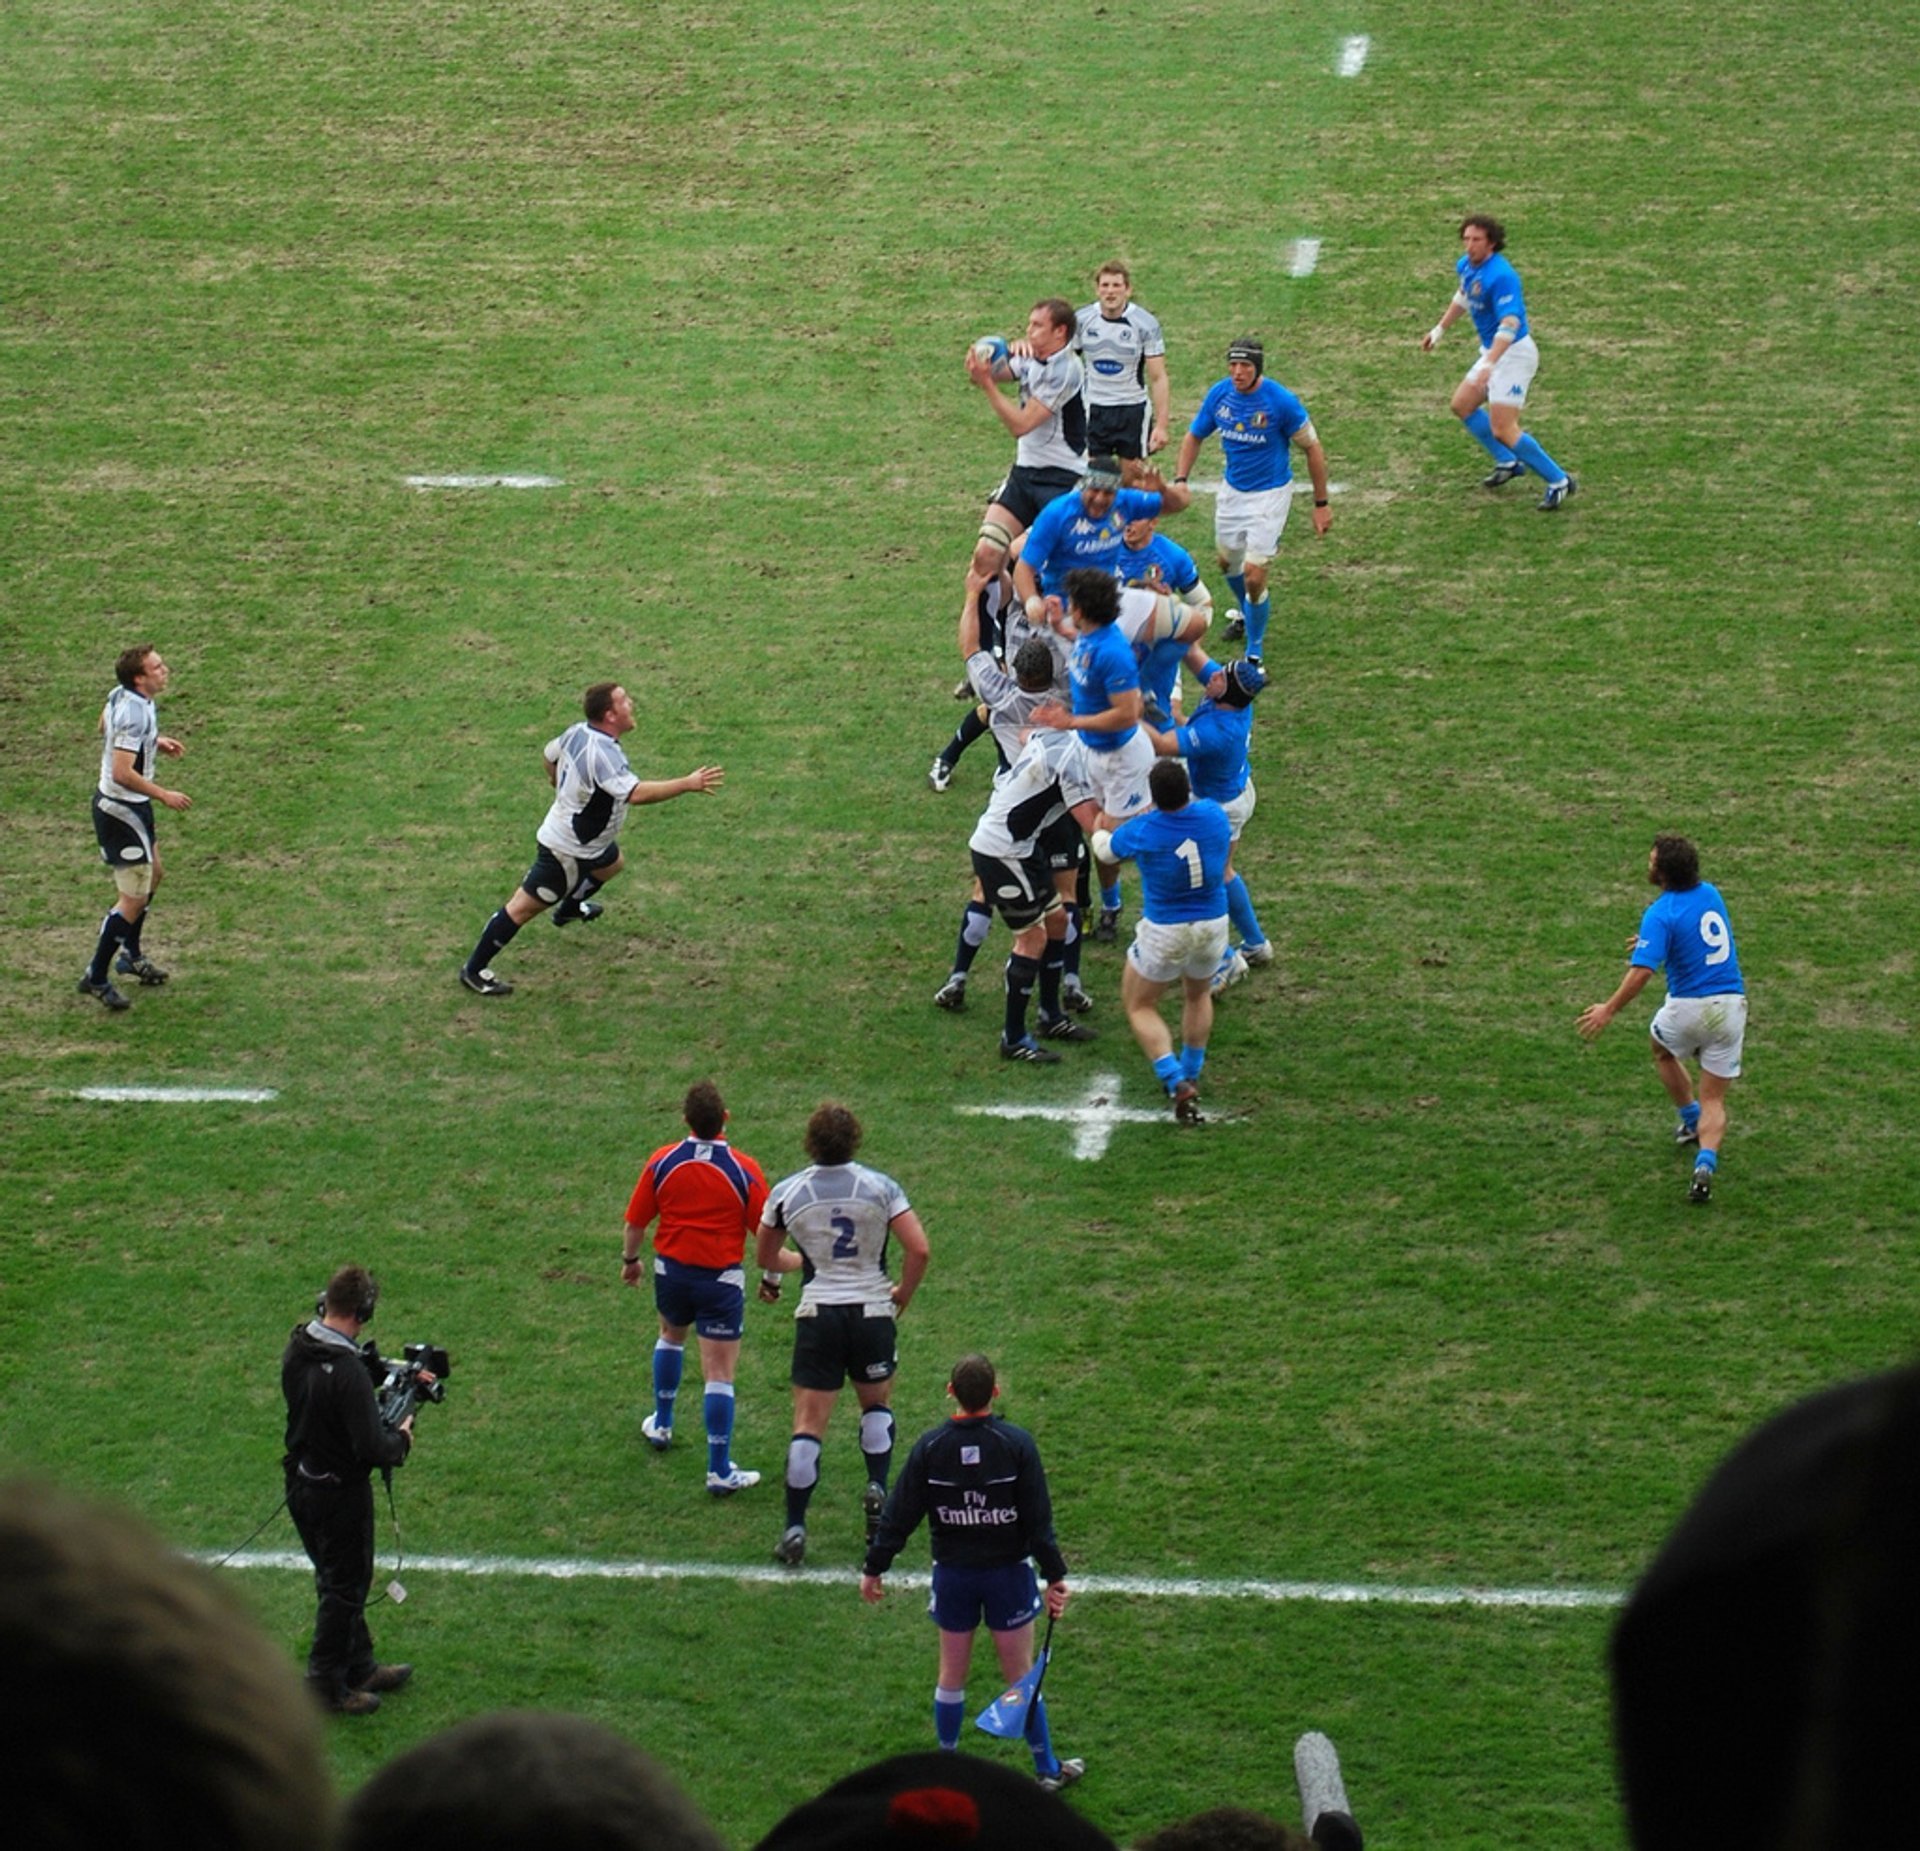 Rugby in Edinburgh: Six Nations Cup